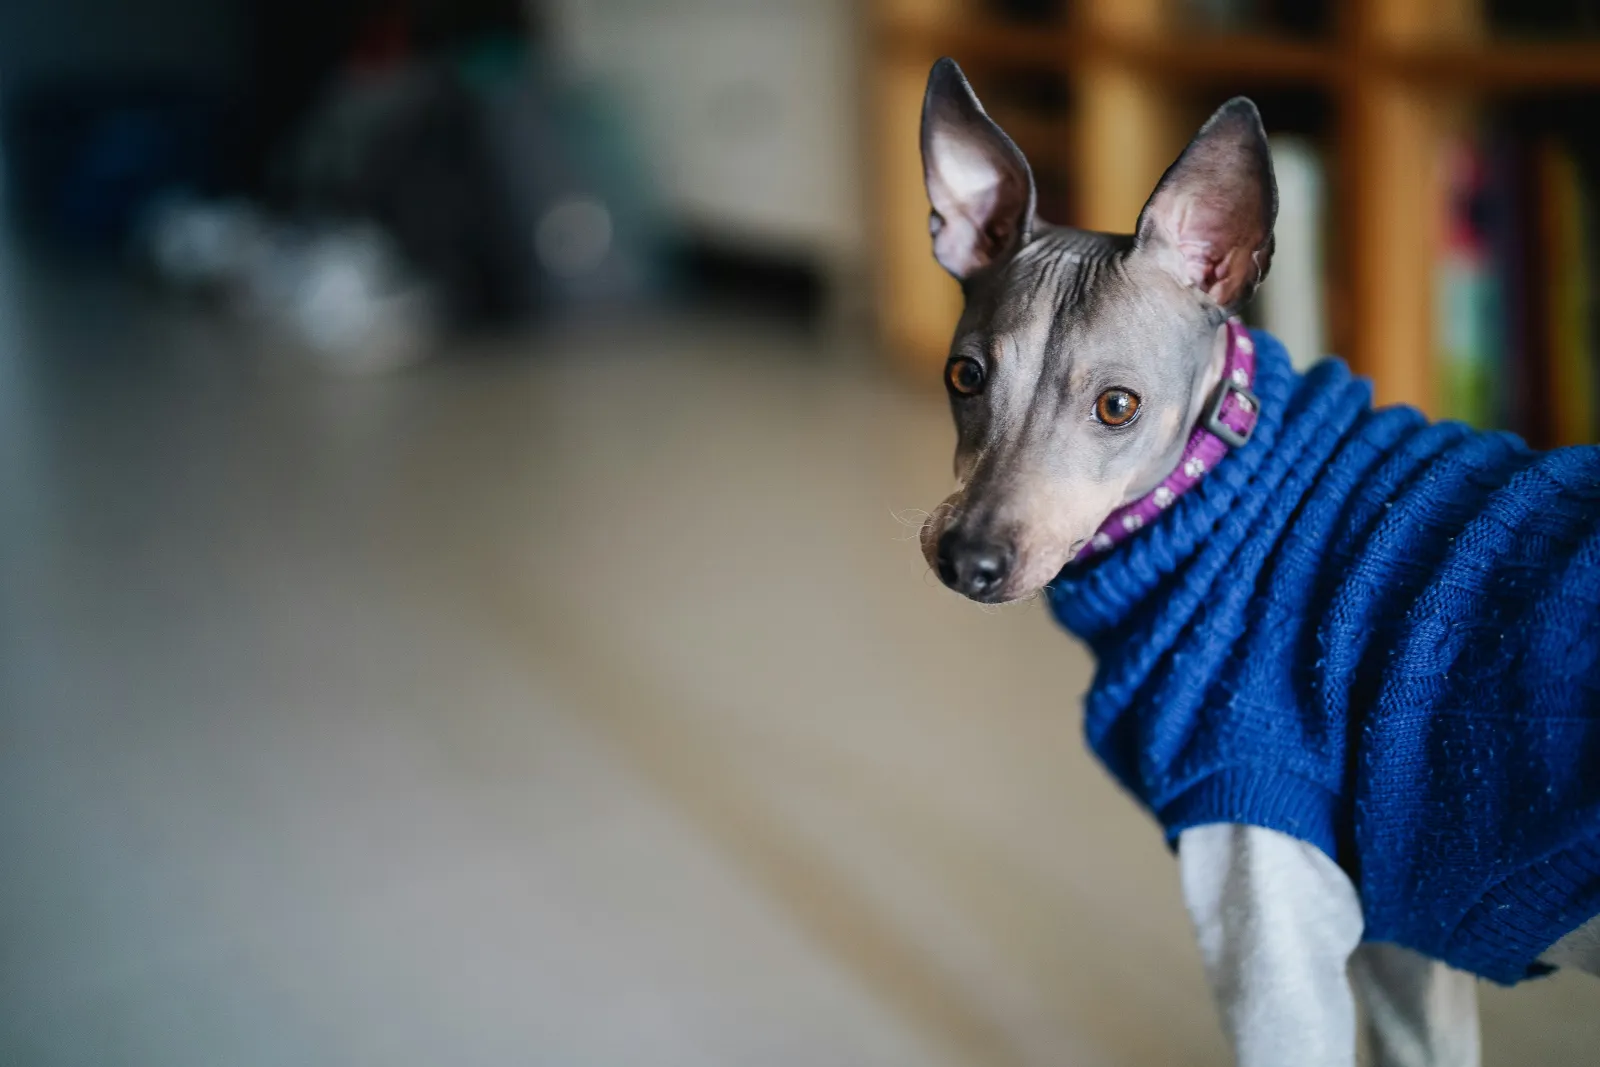 an American Hairless terrier wearing a blue sweater and shirt